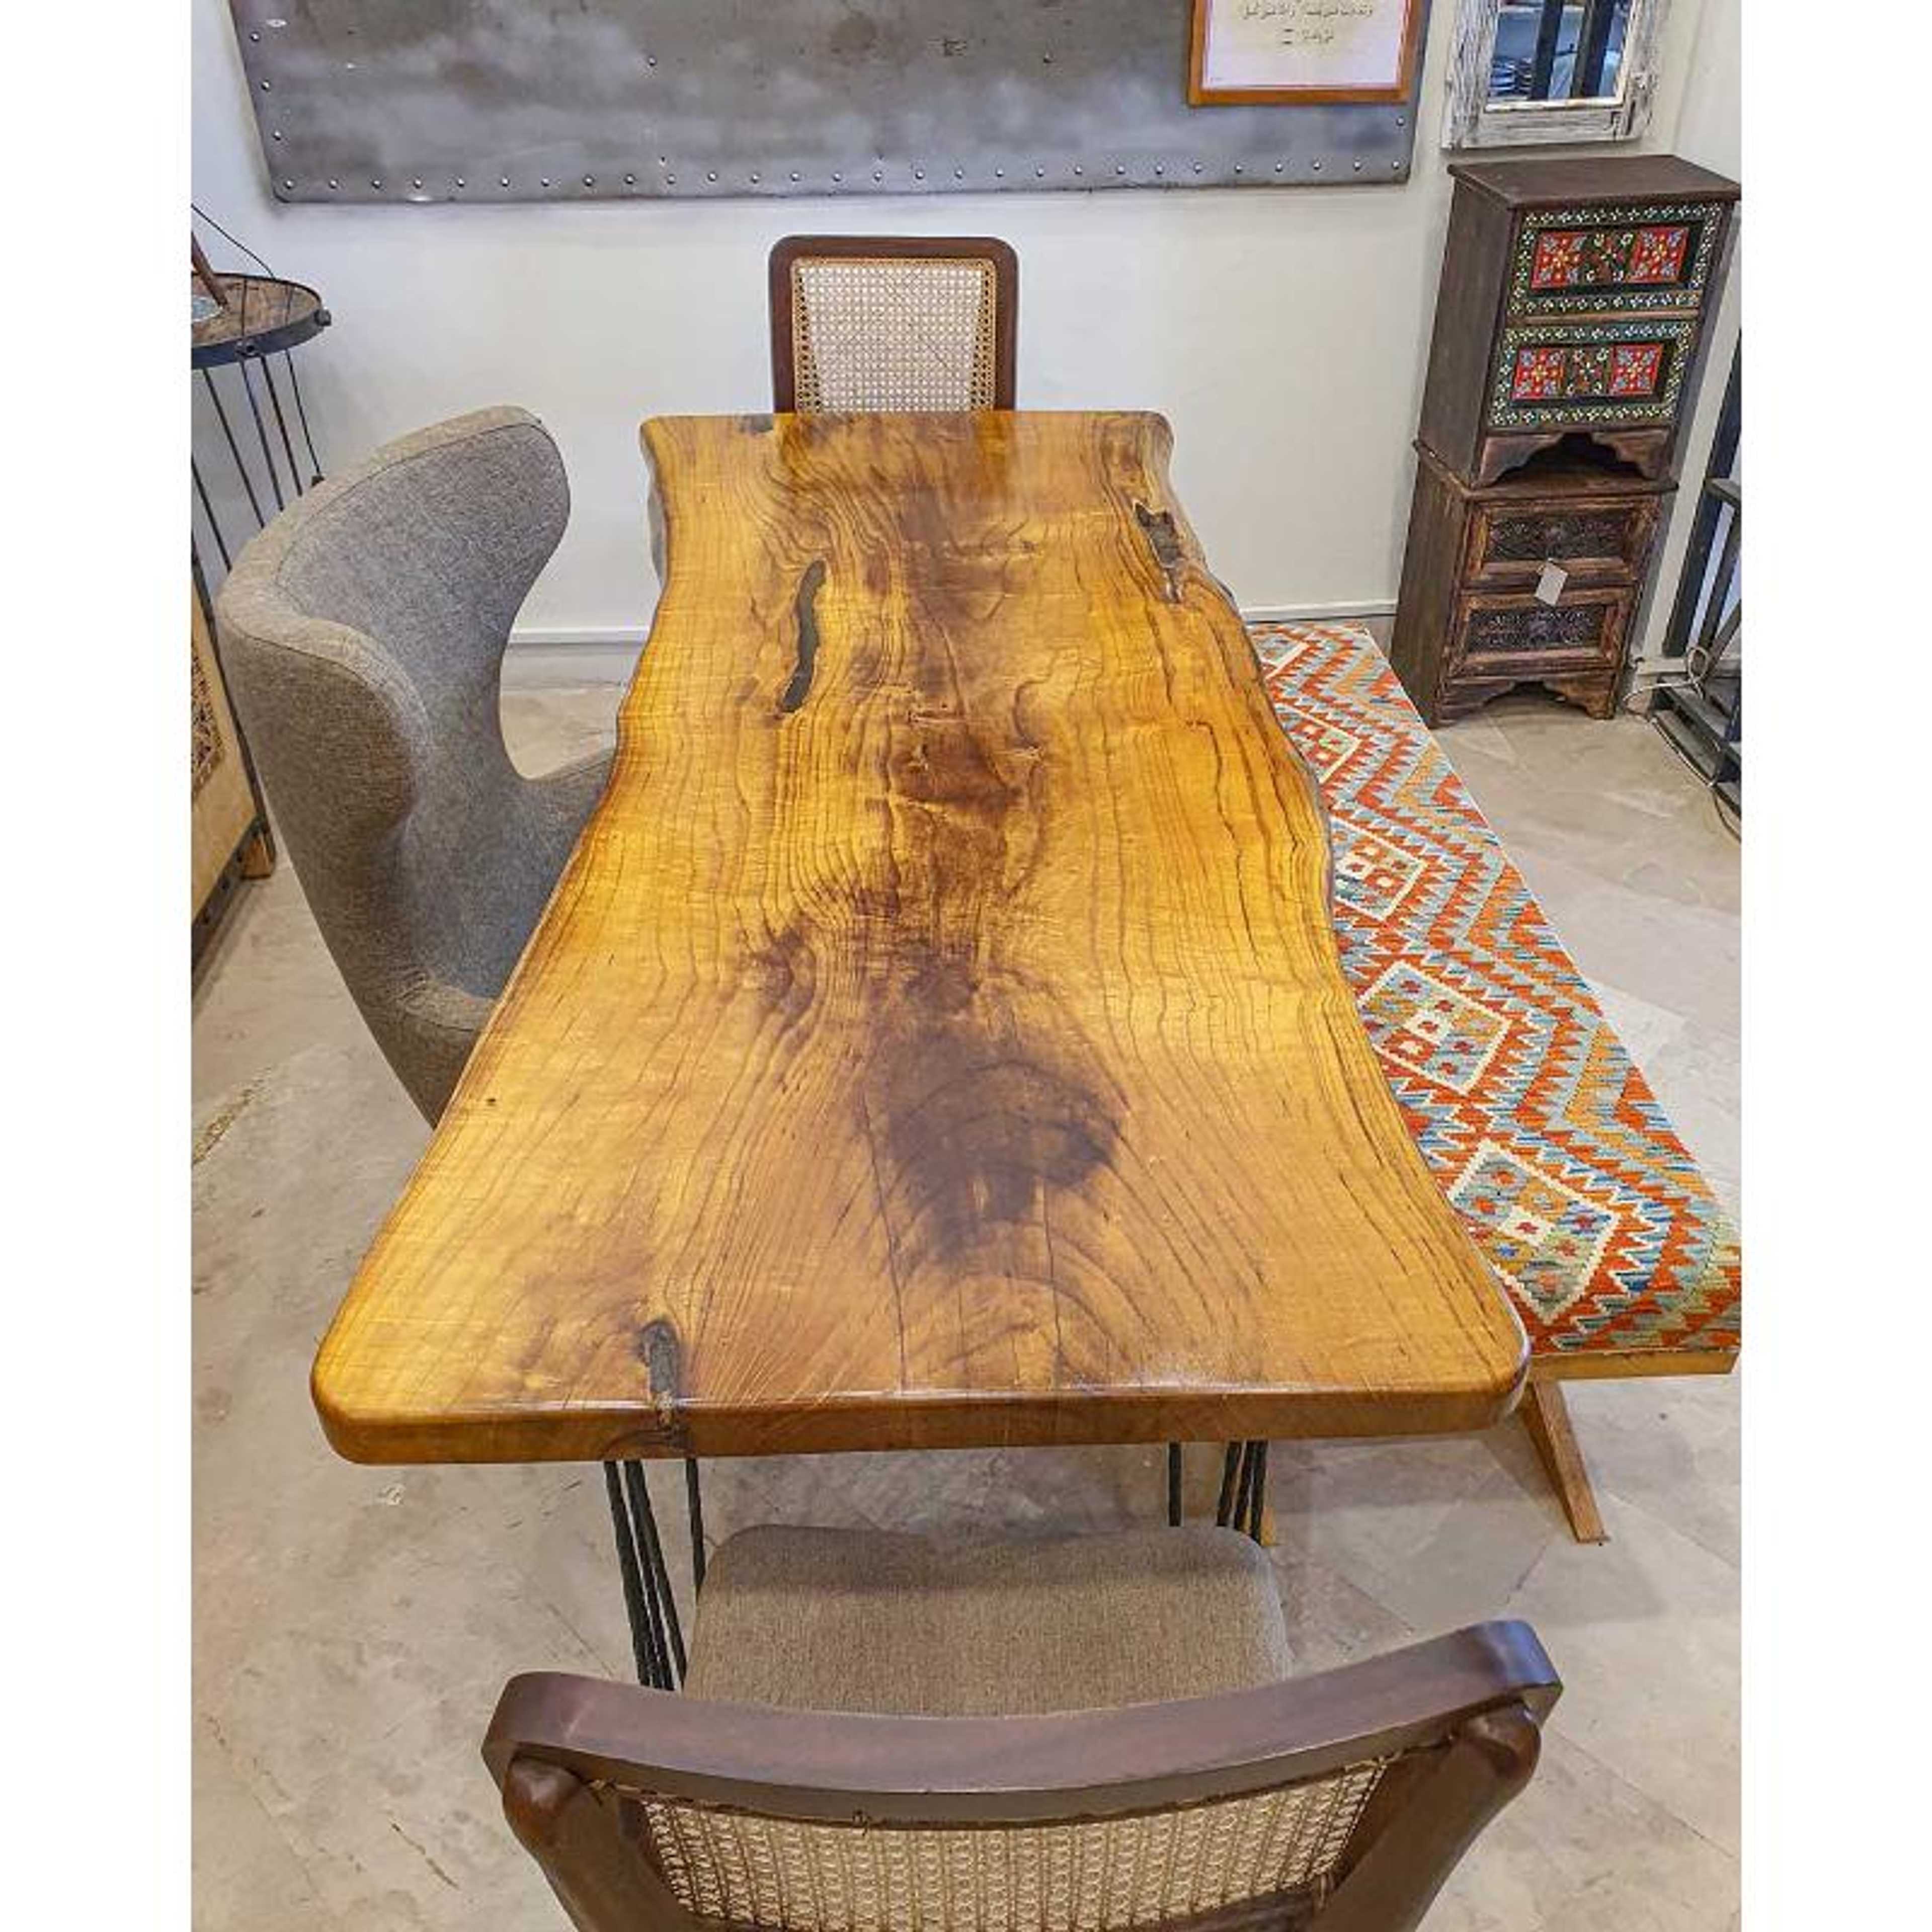 ONE PIECE WAKHAN DINING TABLE